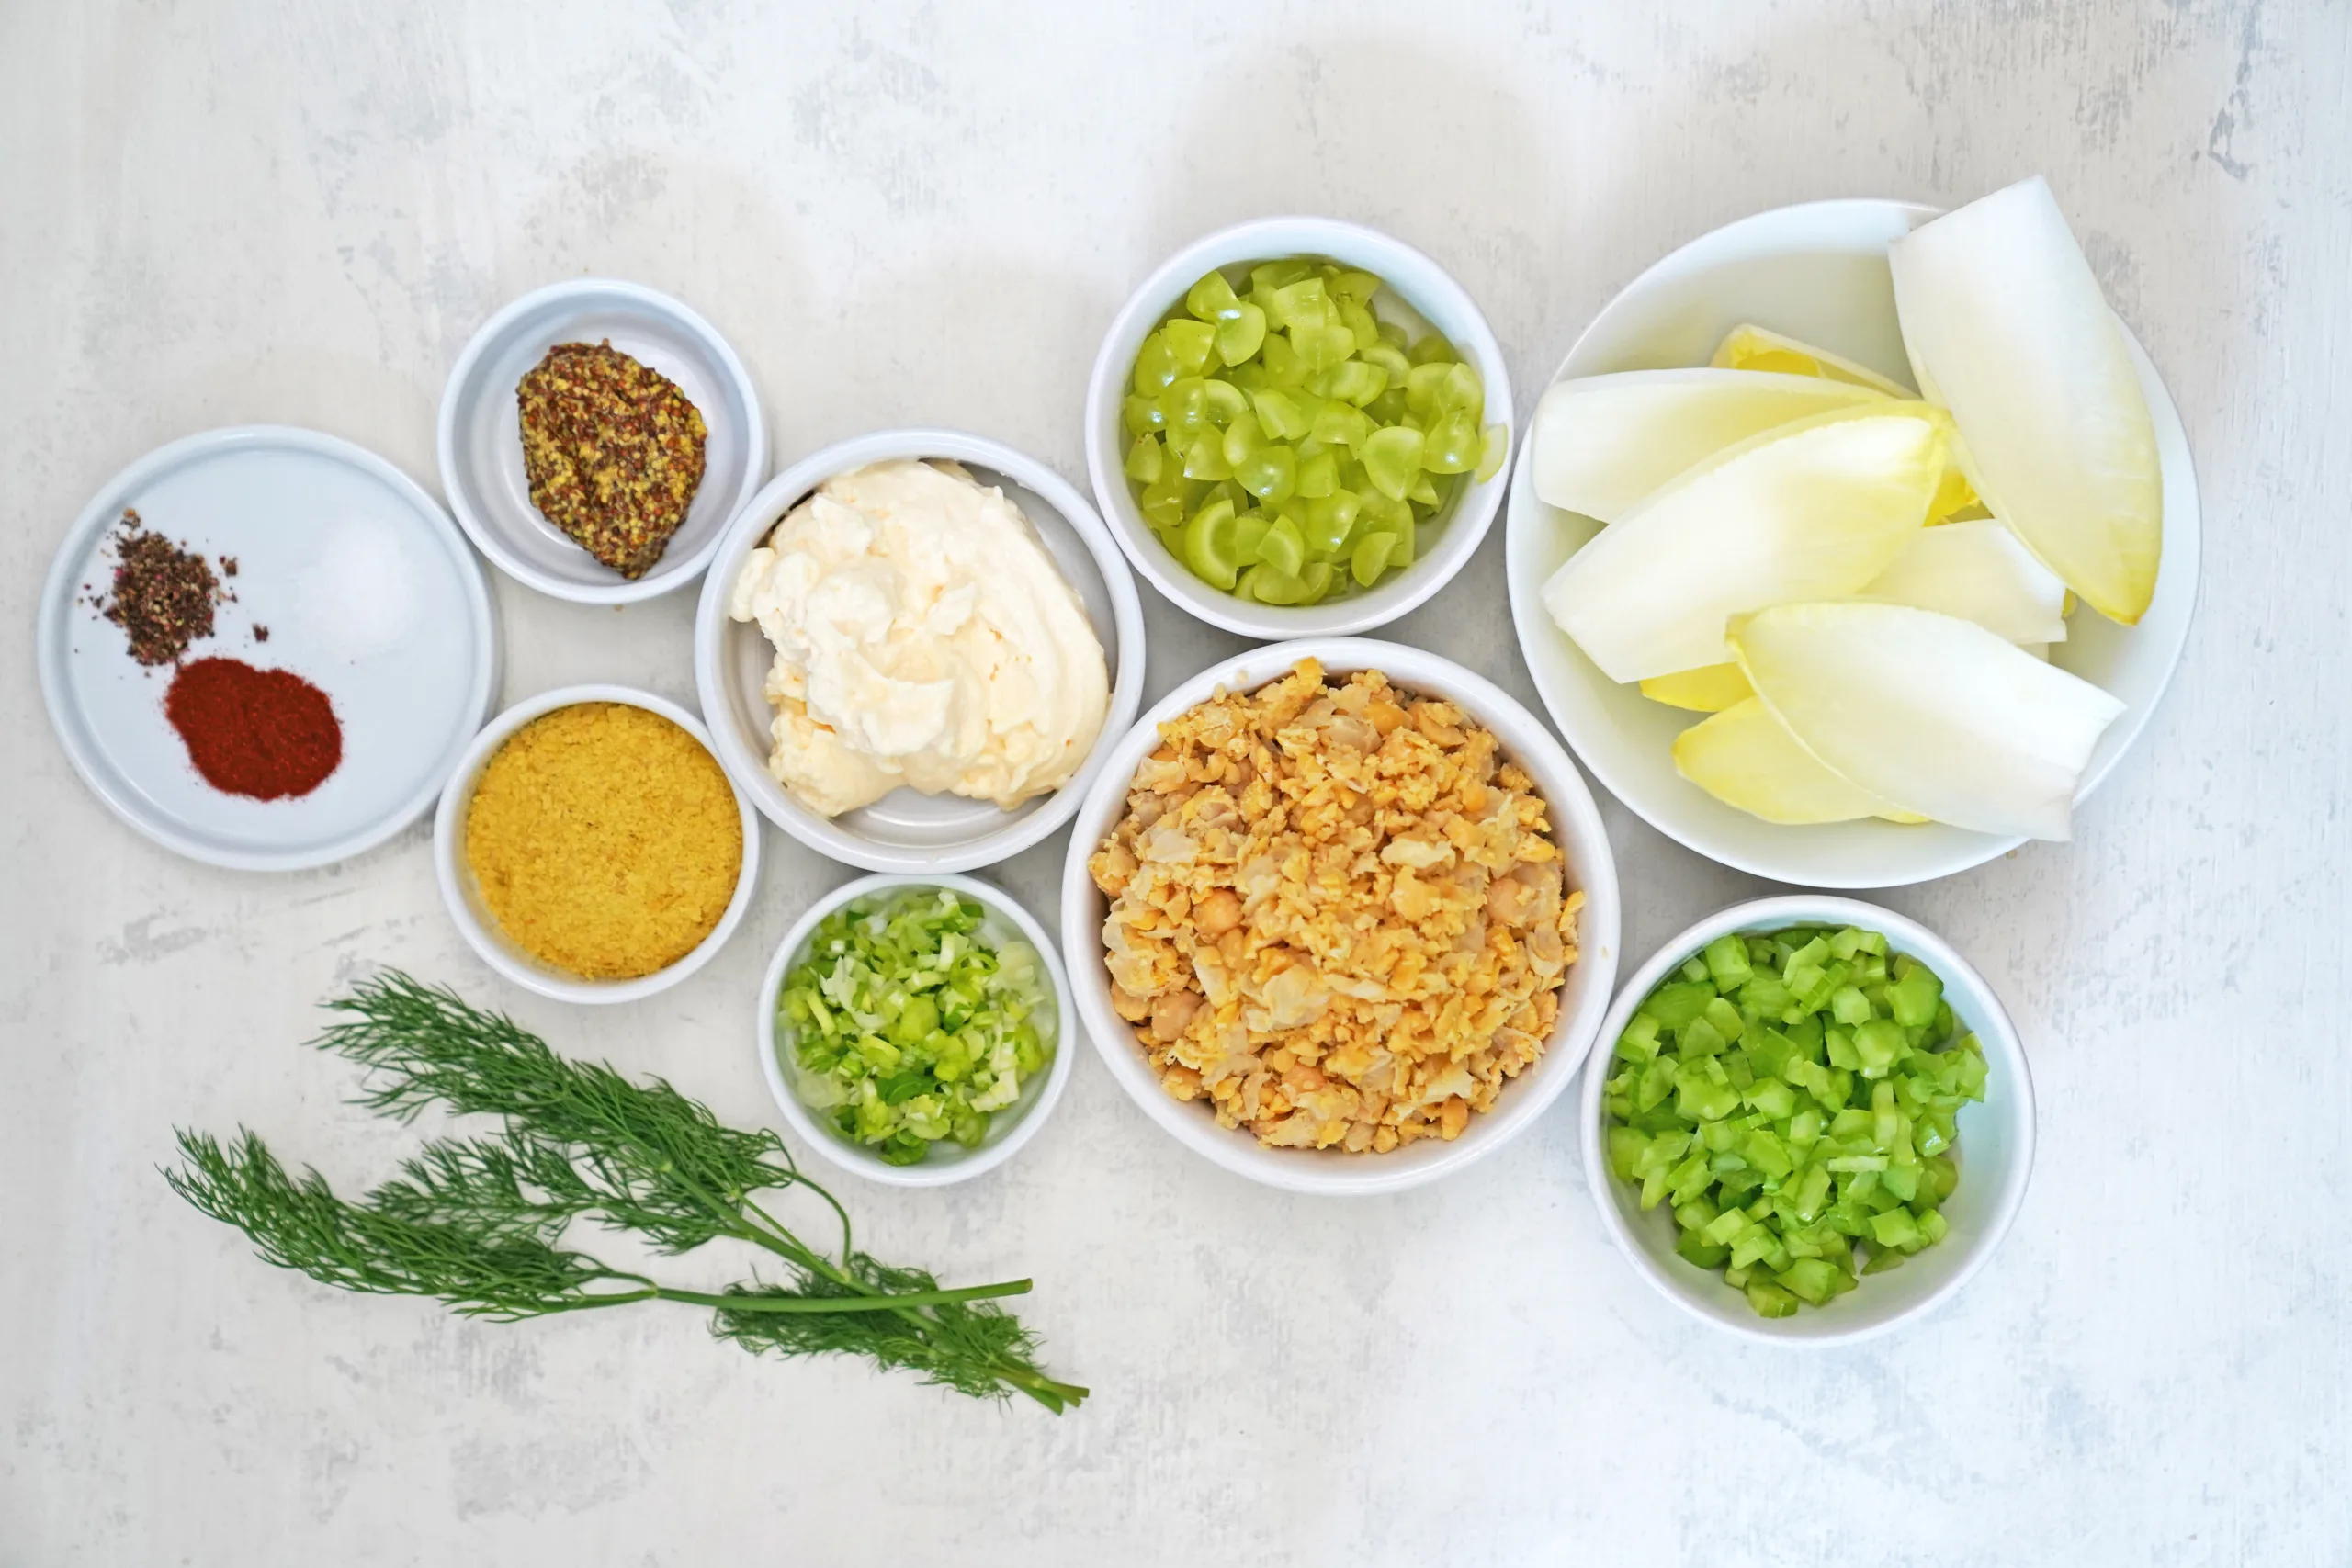 chickpea endive boats ingredients image